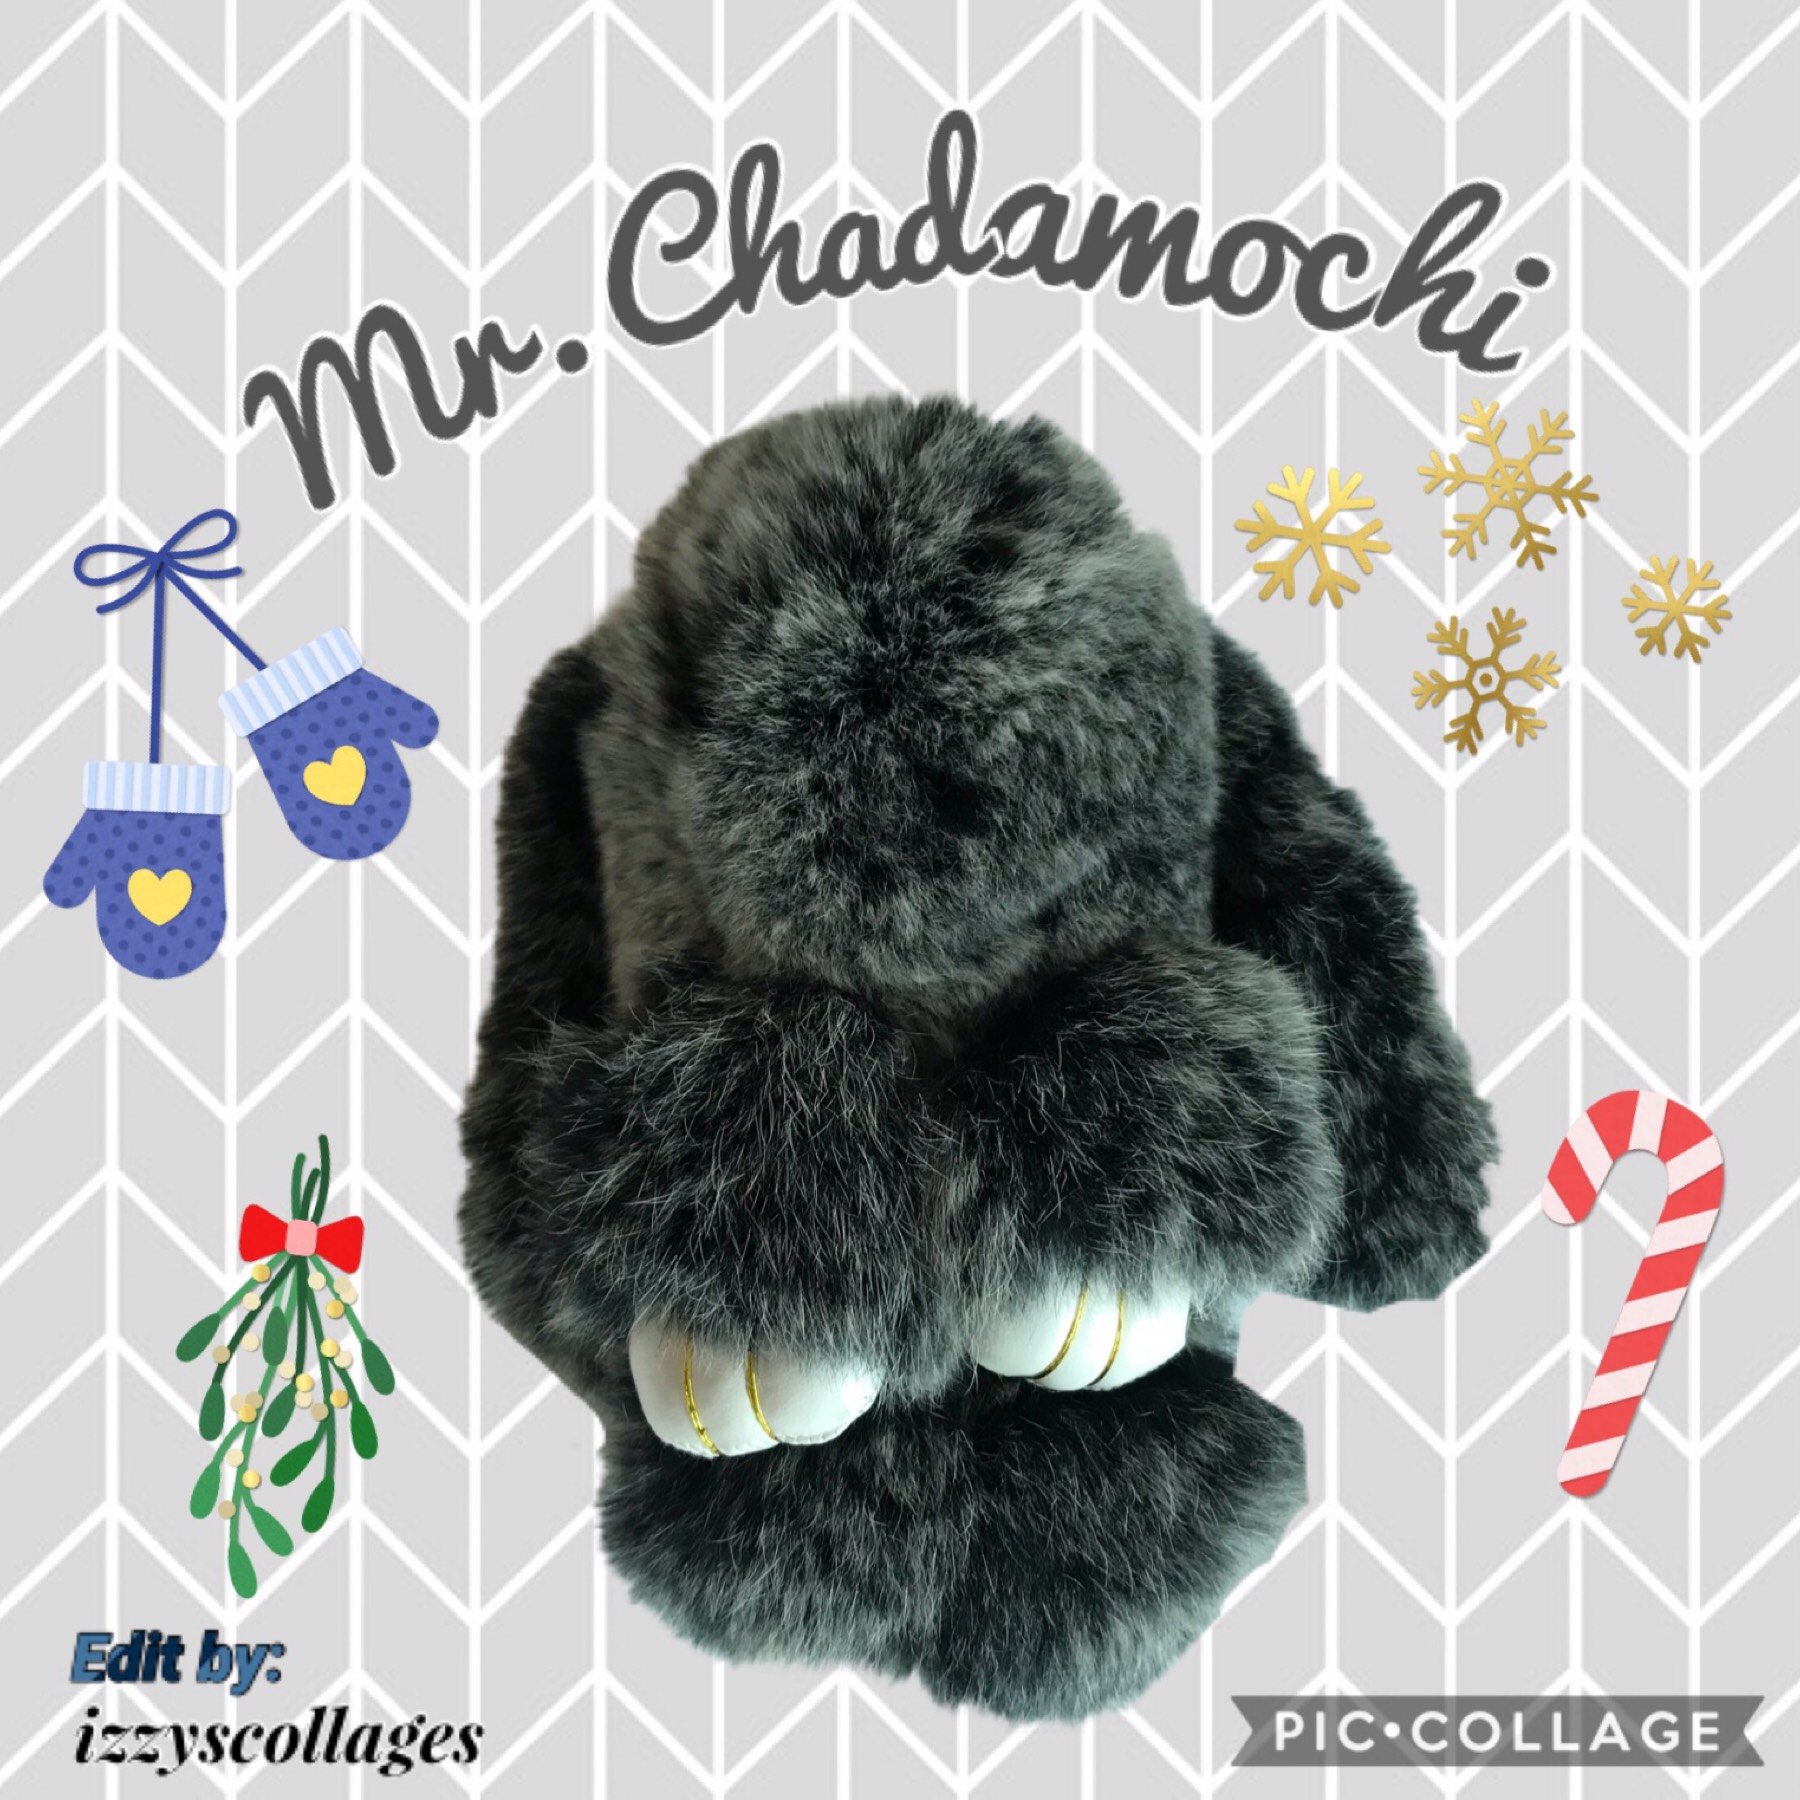 Meet Mr. Chadamochi! My bunny! Credit to izzyscollages! You should definitely check out her amazing account! Thx!